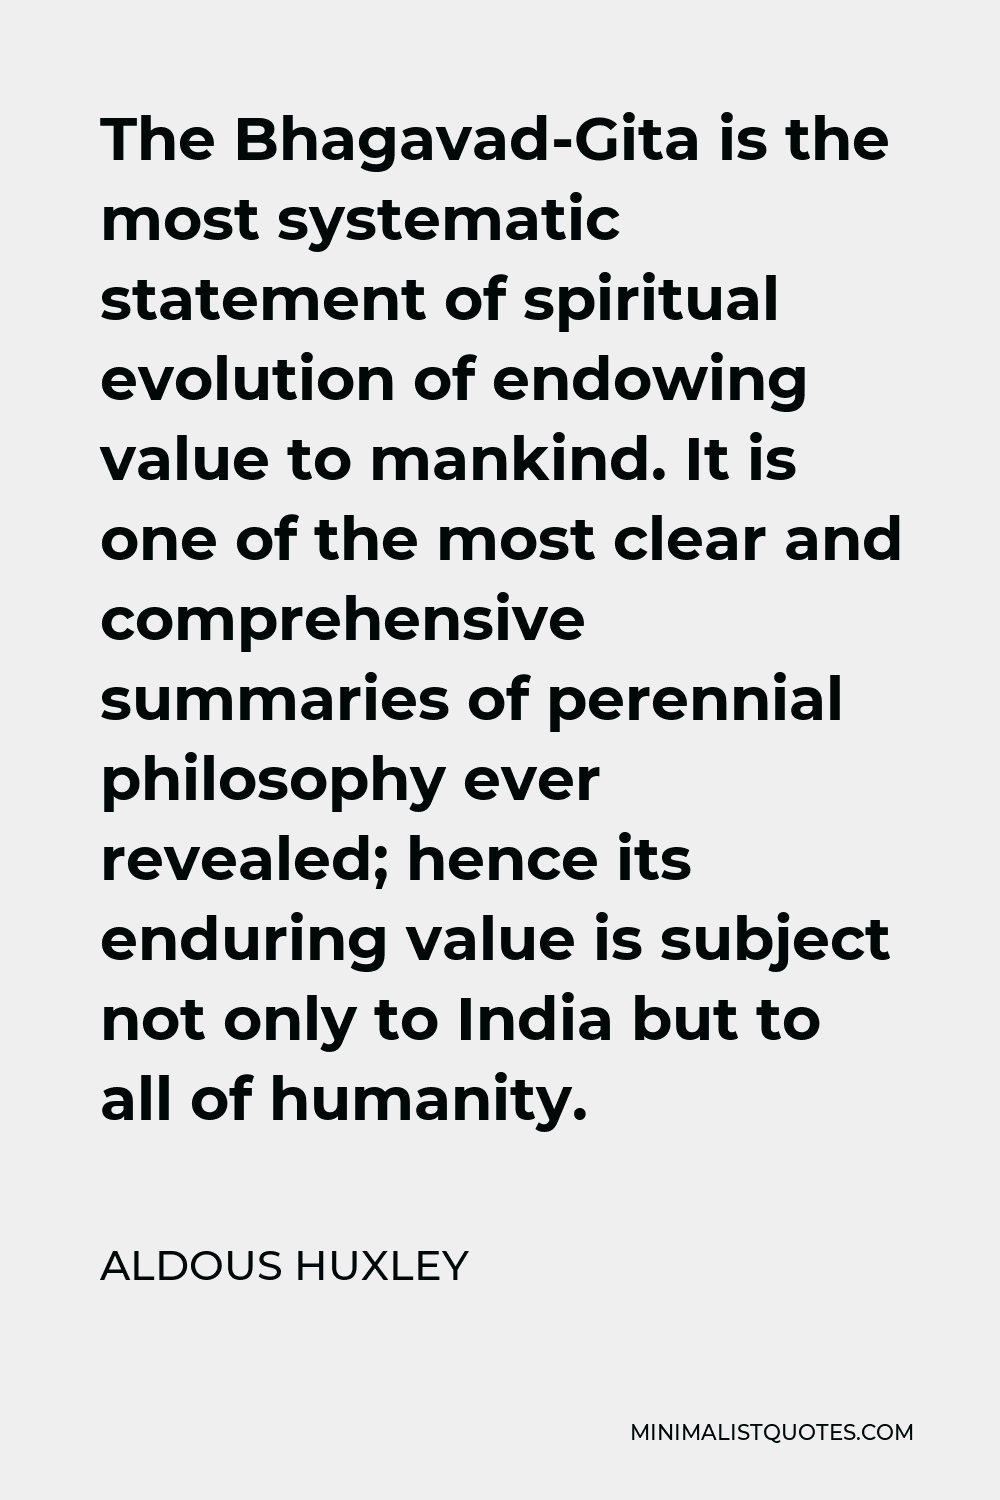 Aldous Huxley Quote - The Bhagavad-Gita is the most systematic statement of spiritual evolution of endowing value to mankind. It is one of the most clear and comprehensive summaries of perennial philosophy ever revealed; hence its enduring value is subject not only to India but to all of humanity.